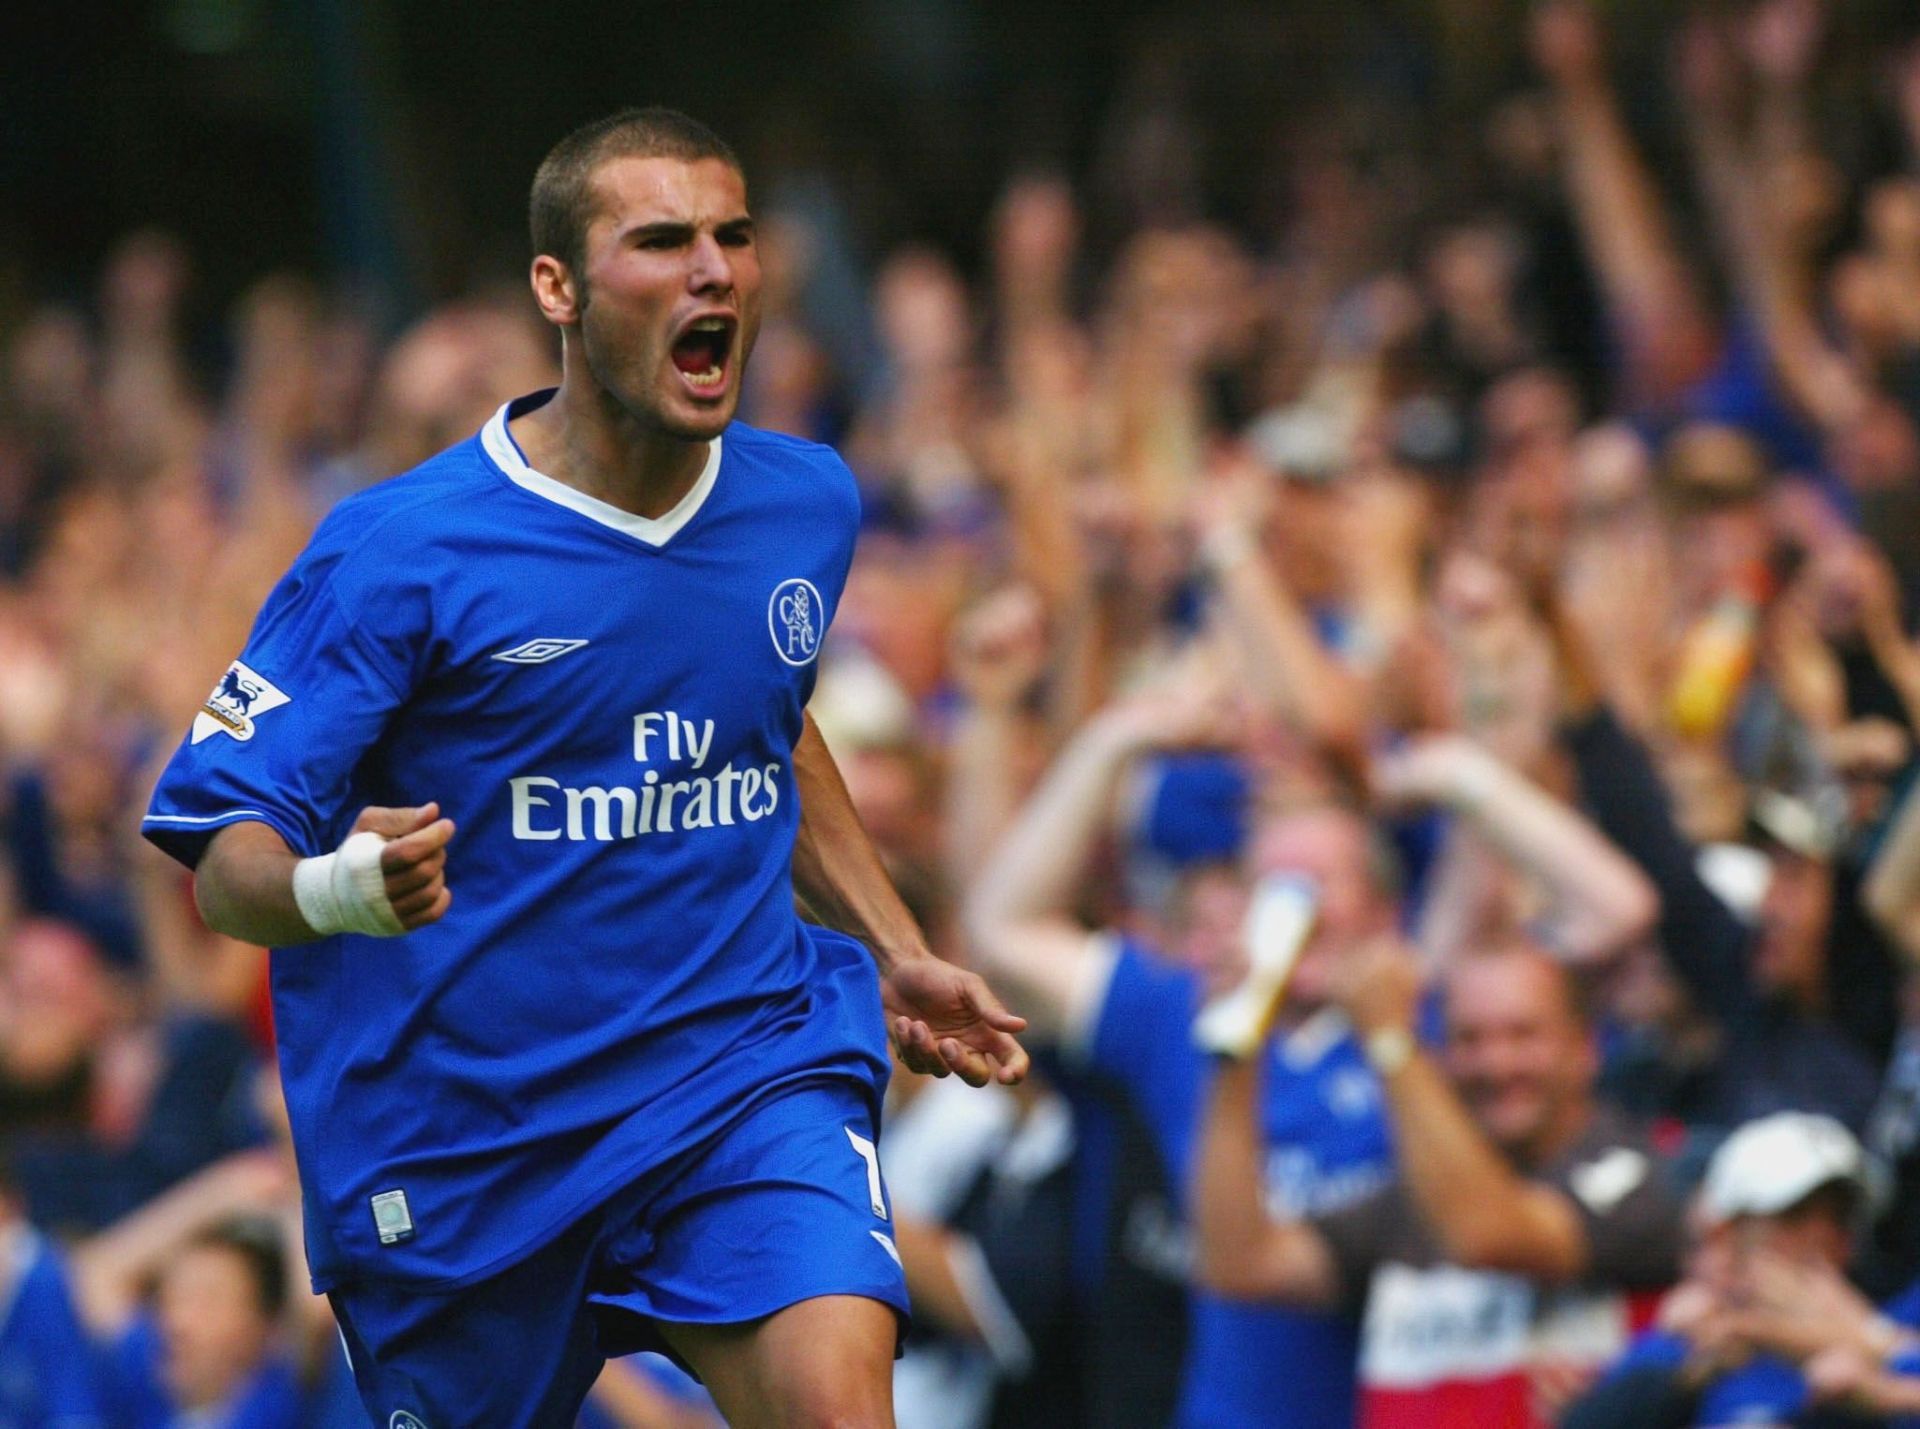 Adrian Mutu of Chelsea starts to celebrate scoring a goal but it was later disallowed